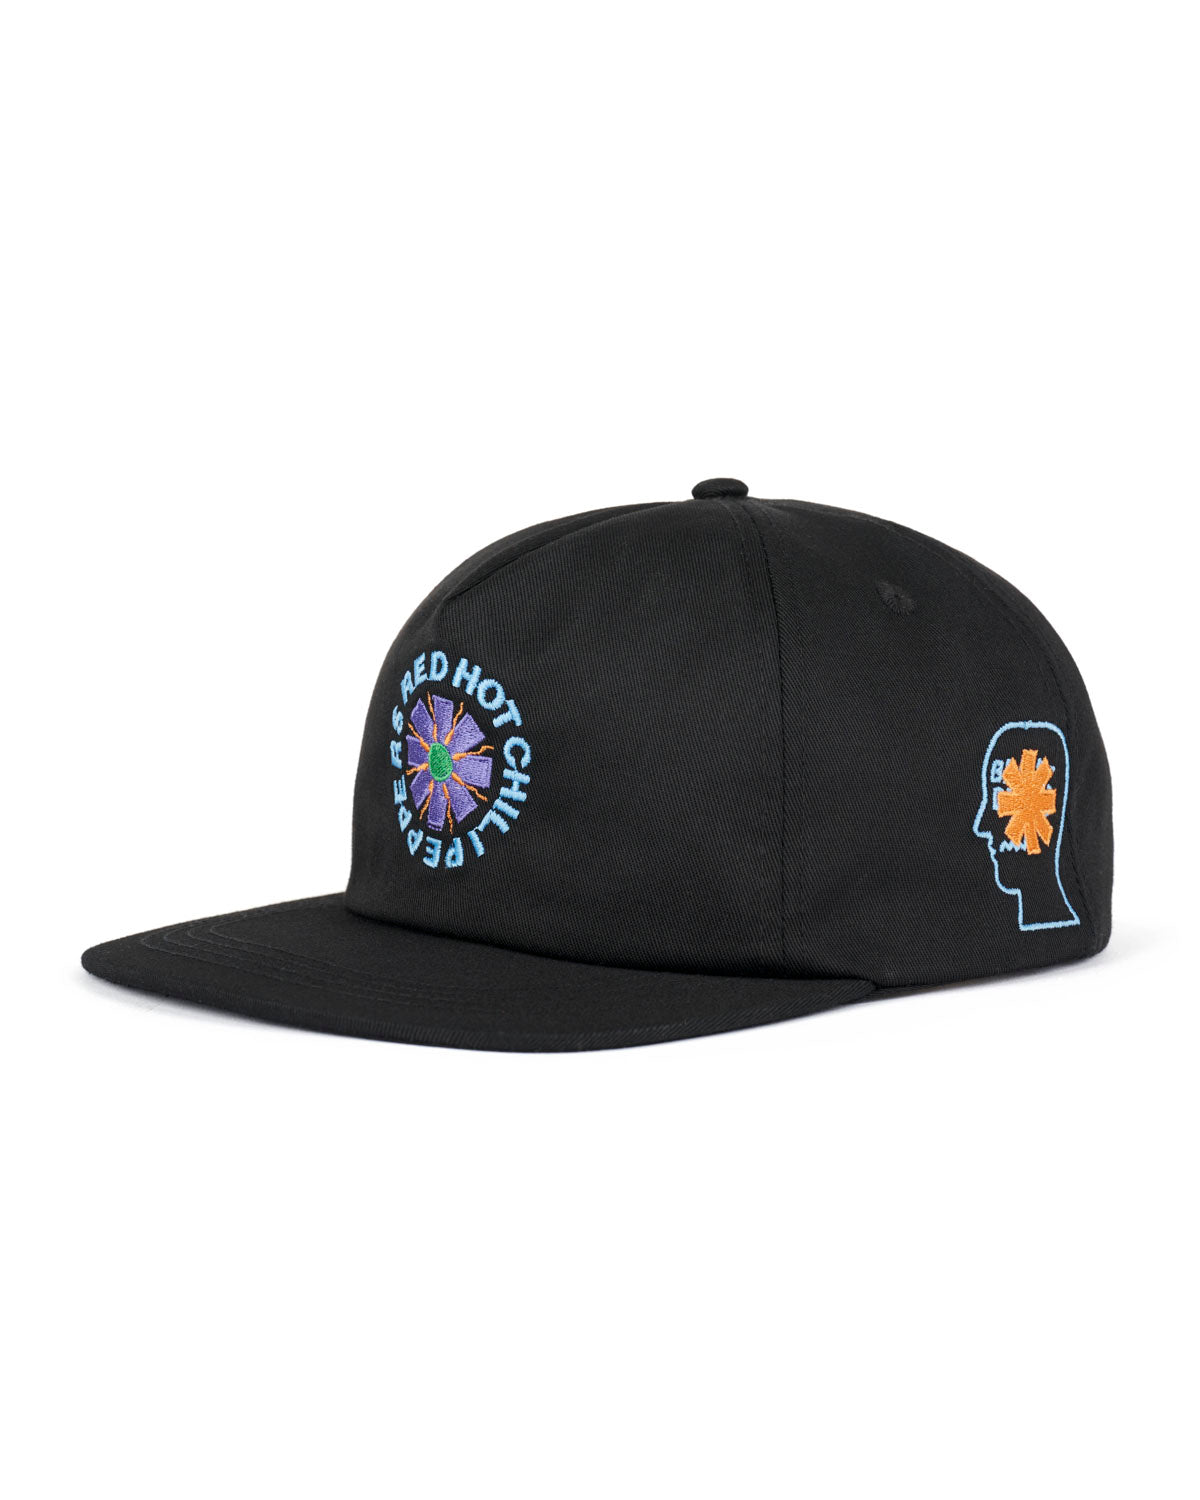 Brain Dead x Red Hot Chili Peppers Hat - Black